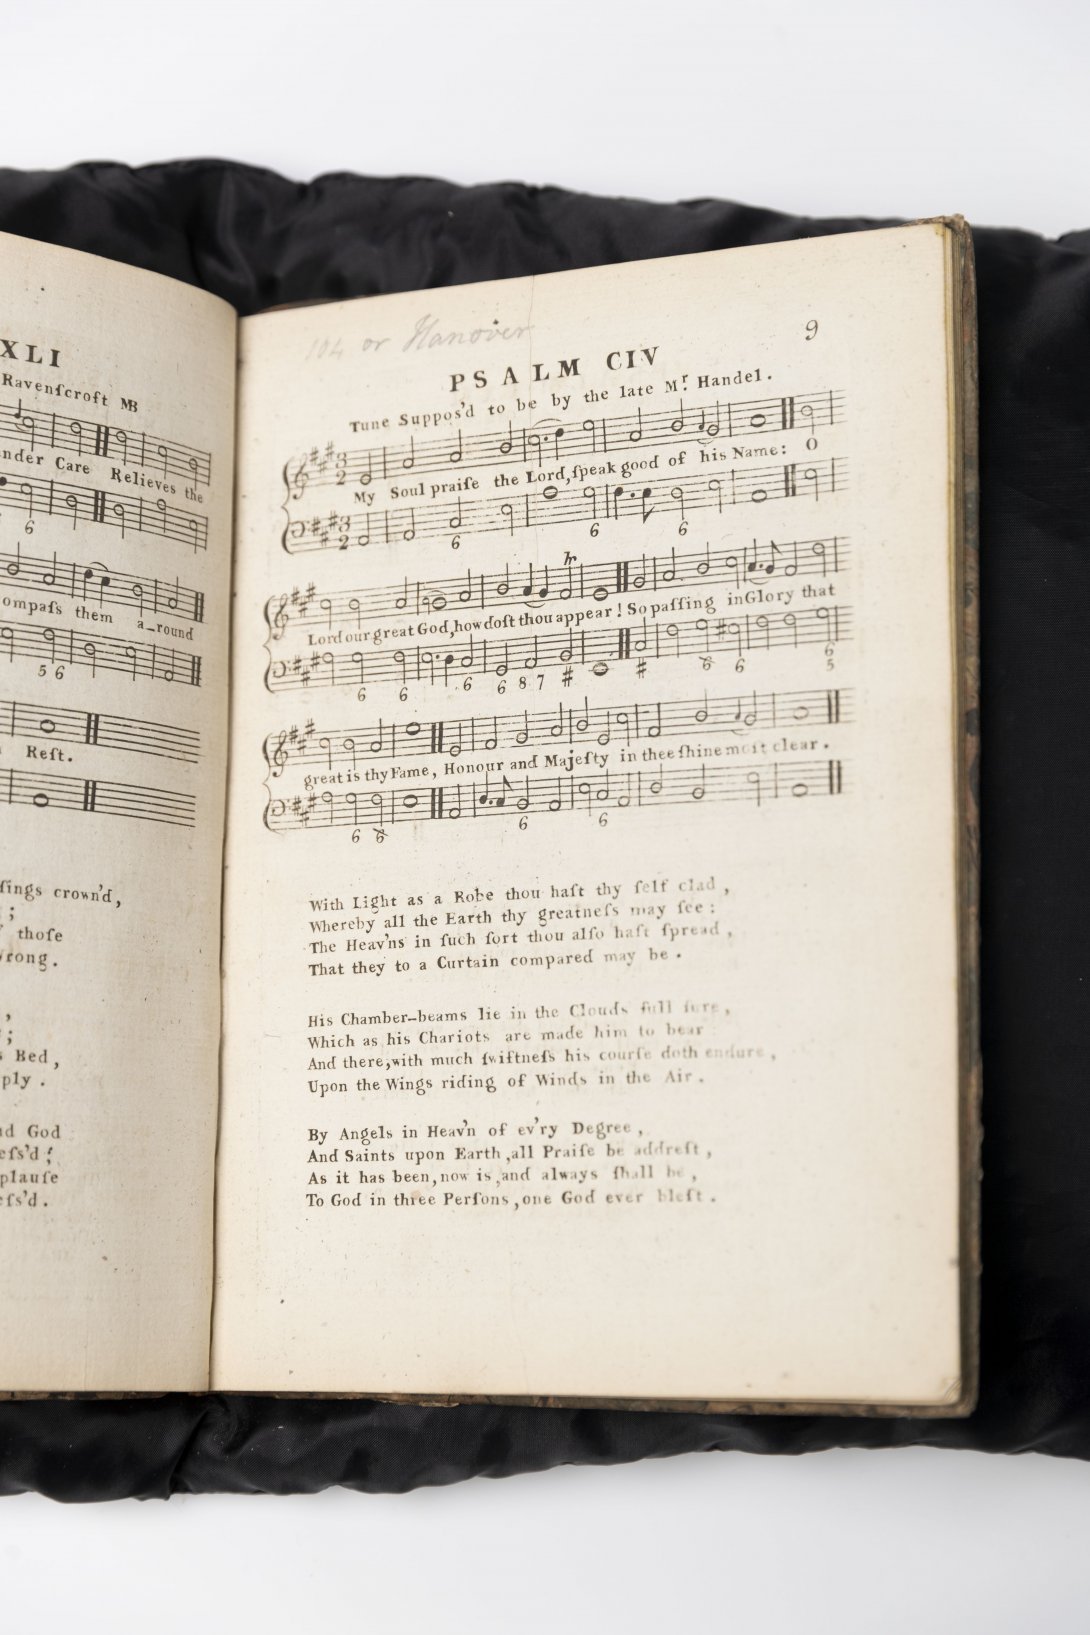 Old book open to music score of a psalm